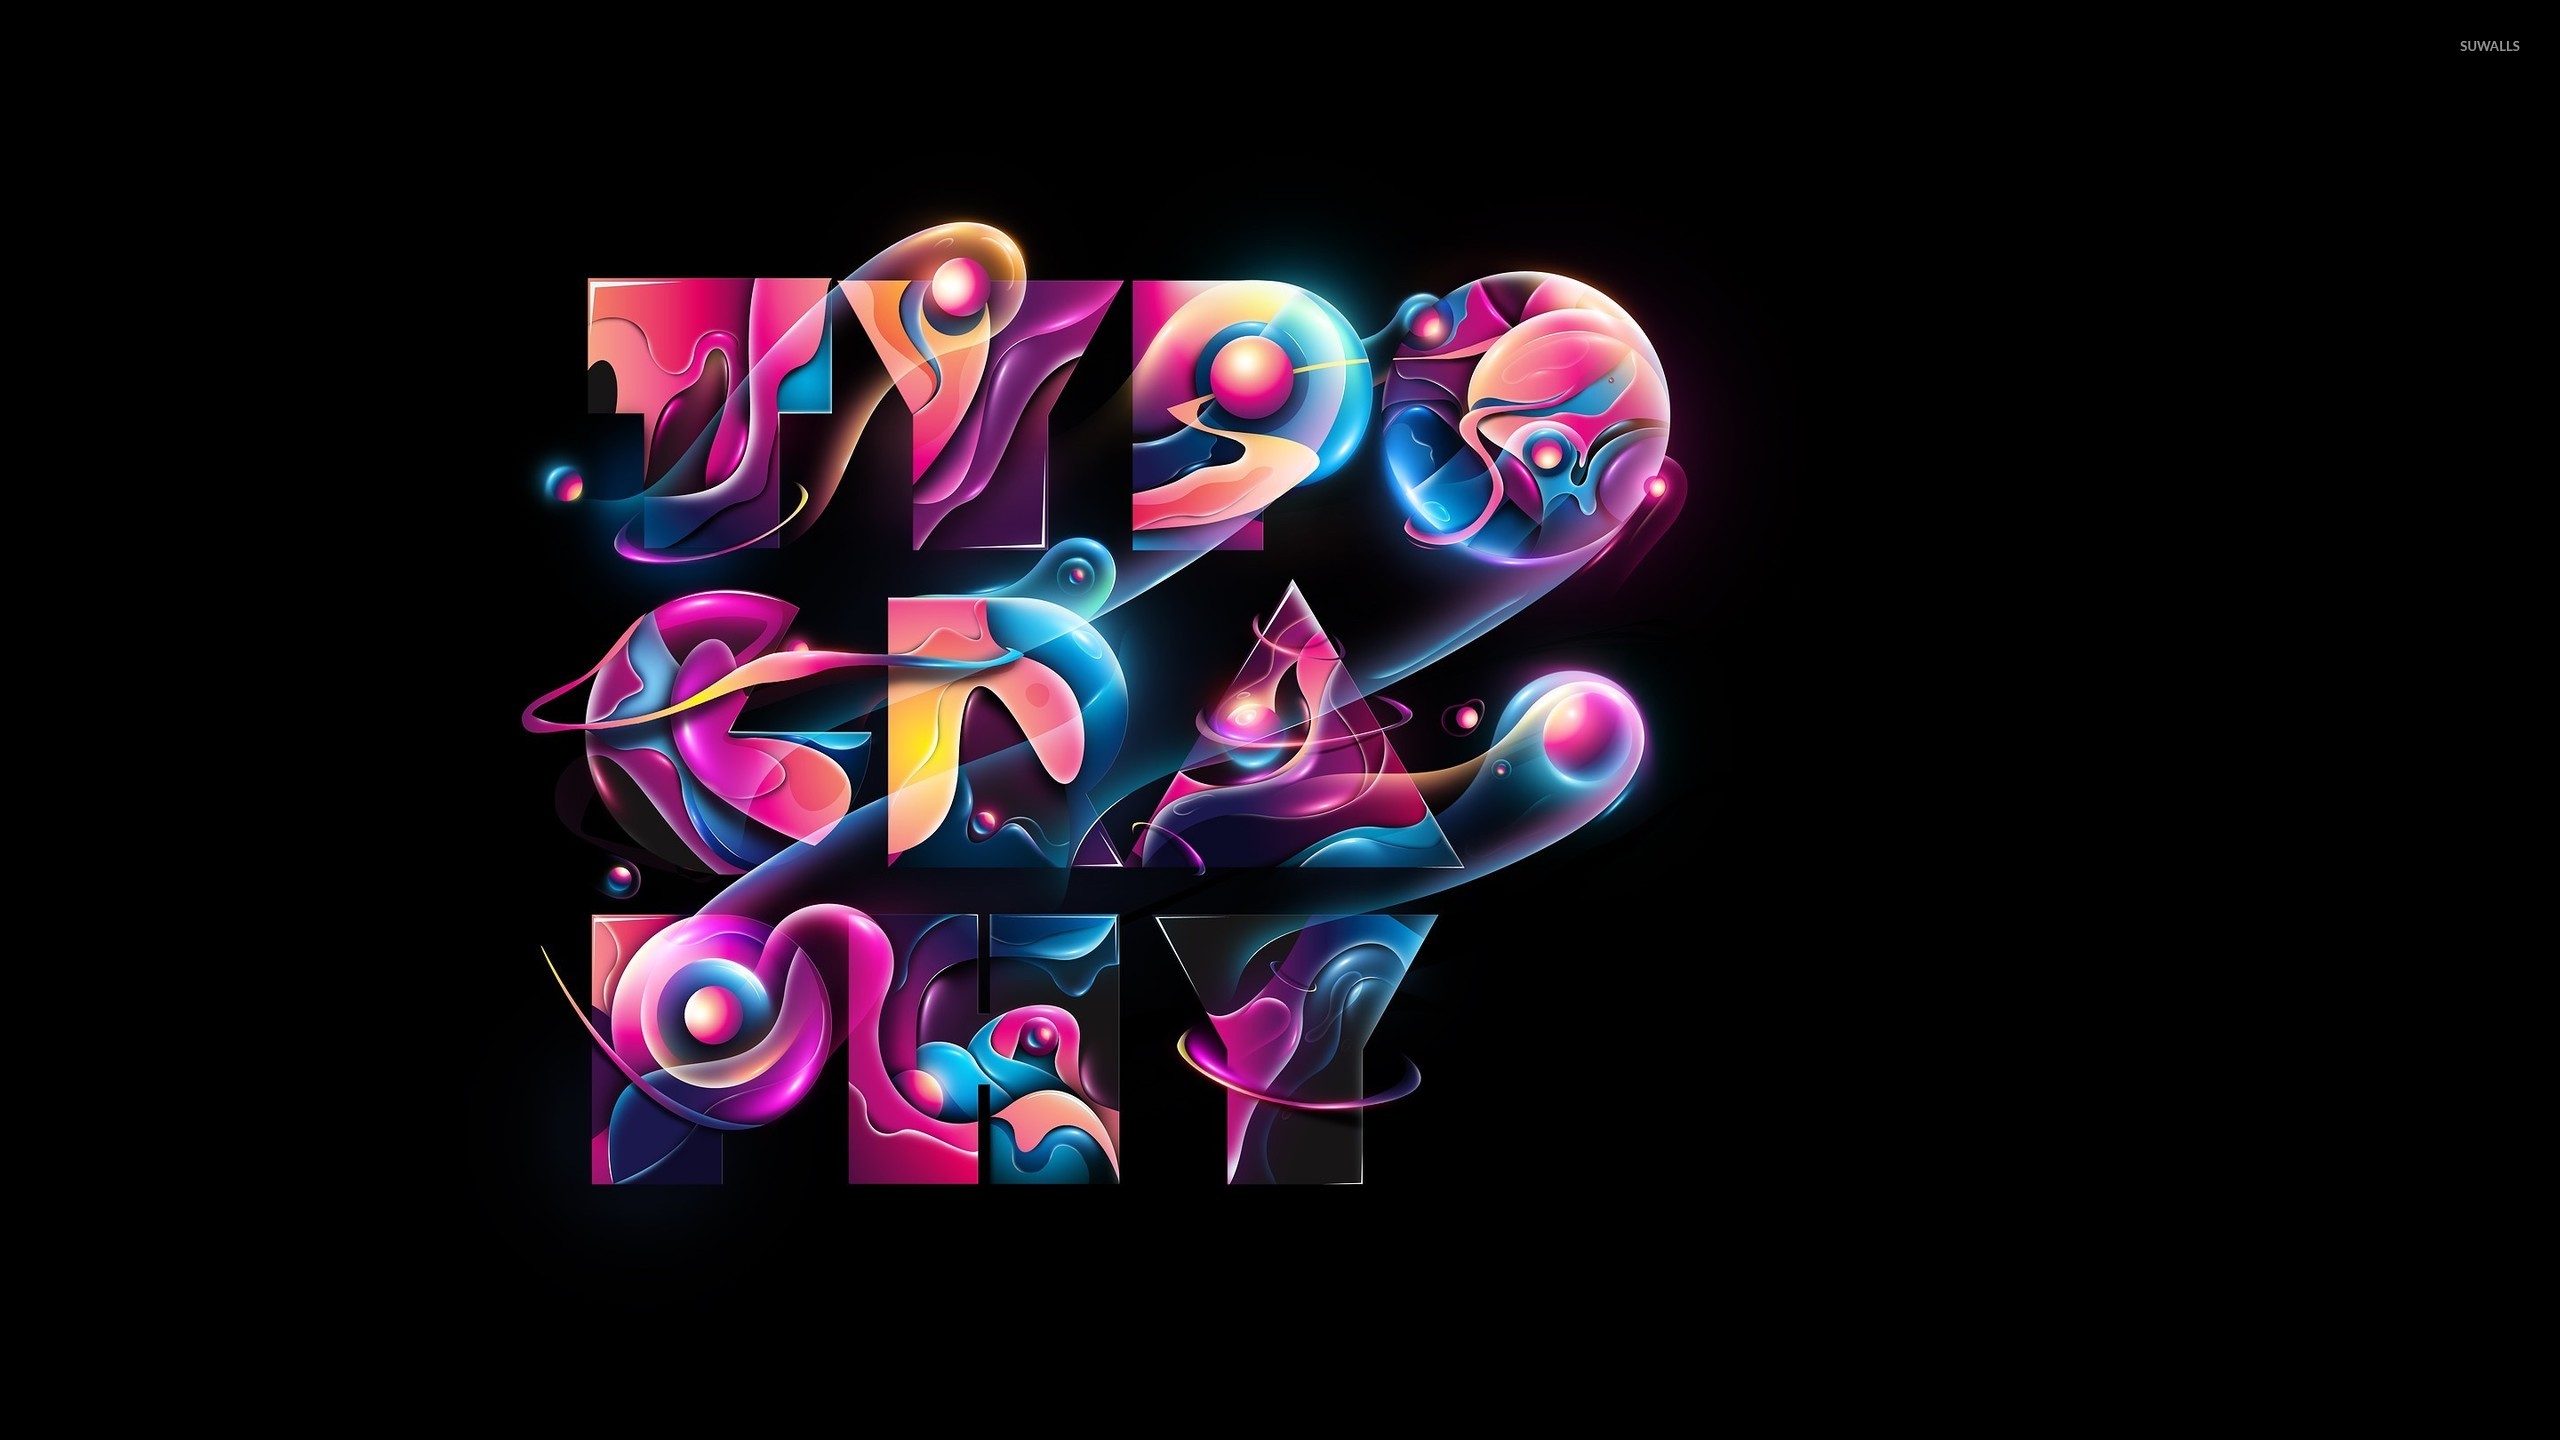 Colorful Typography wallpaper - Typography wallpapers - #47333